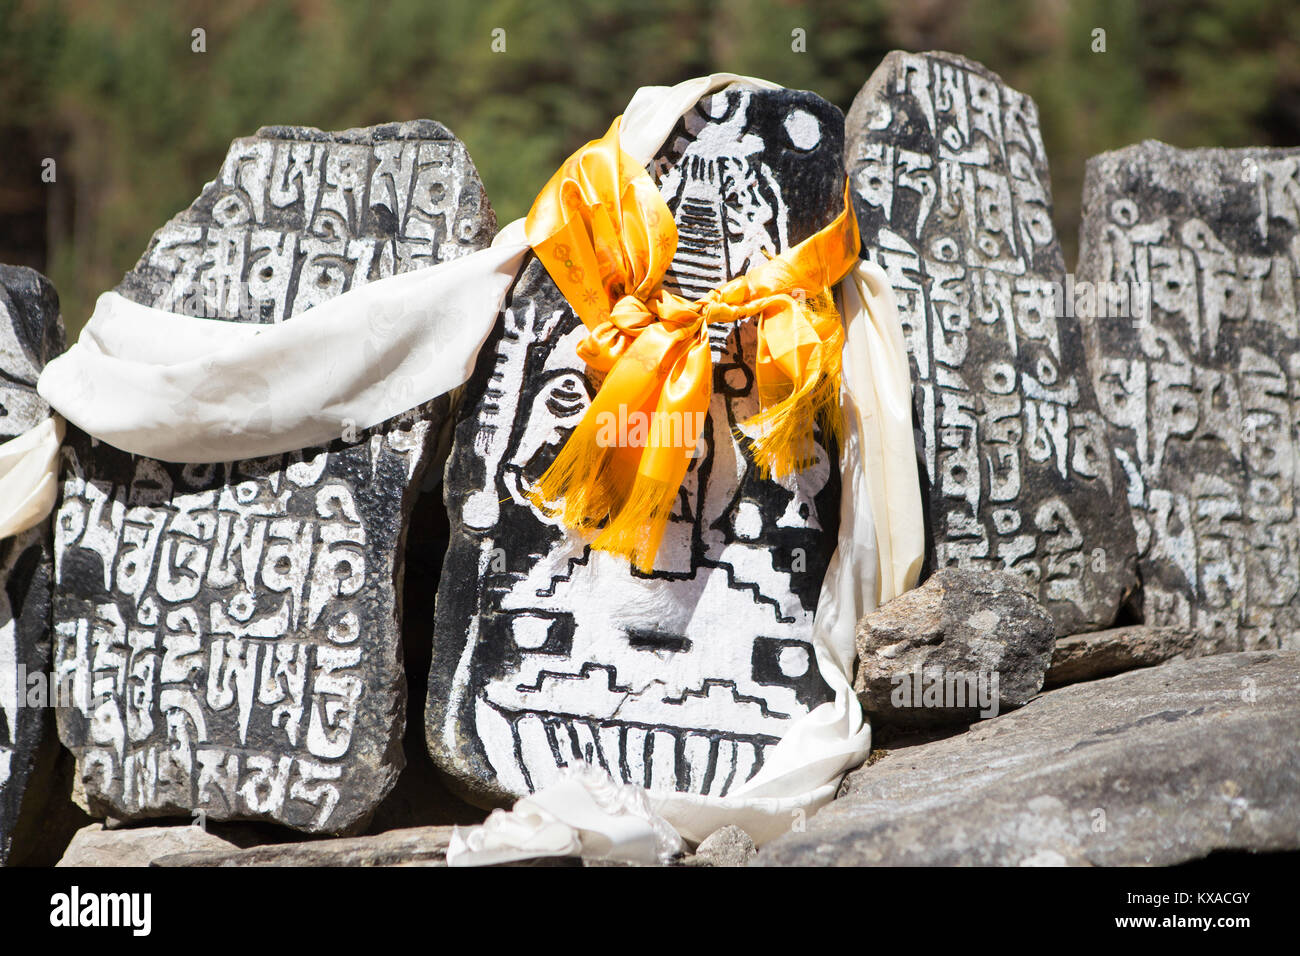 A Buddhist monument on the way to Everest Base Camp. Mani walls with mantras, a stupa and prayer flags.  In the evenings you will be rewarded with delicious Nepalese cuisine around the dining-room fire while sipping Sherpa tea and conversing with other like-minded travelers. Stock Photo